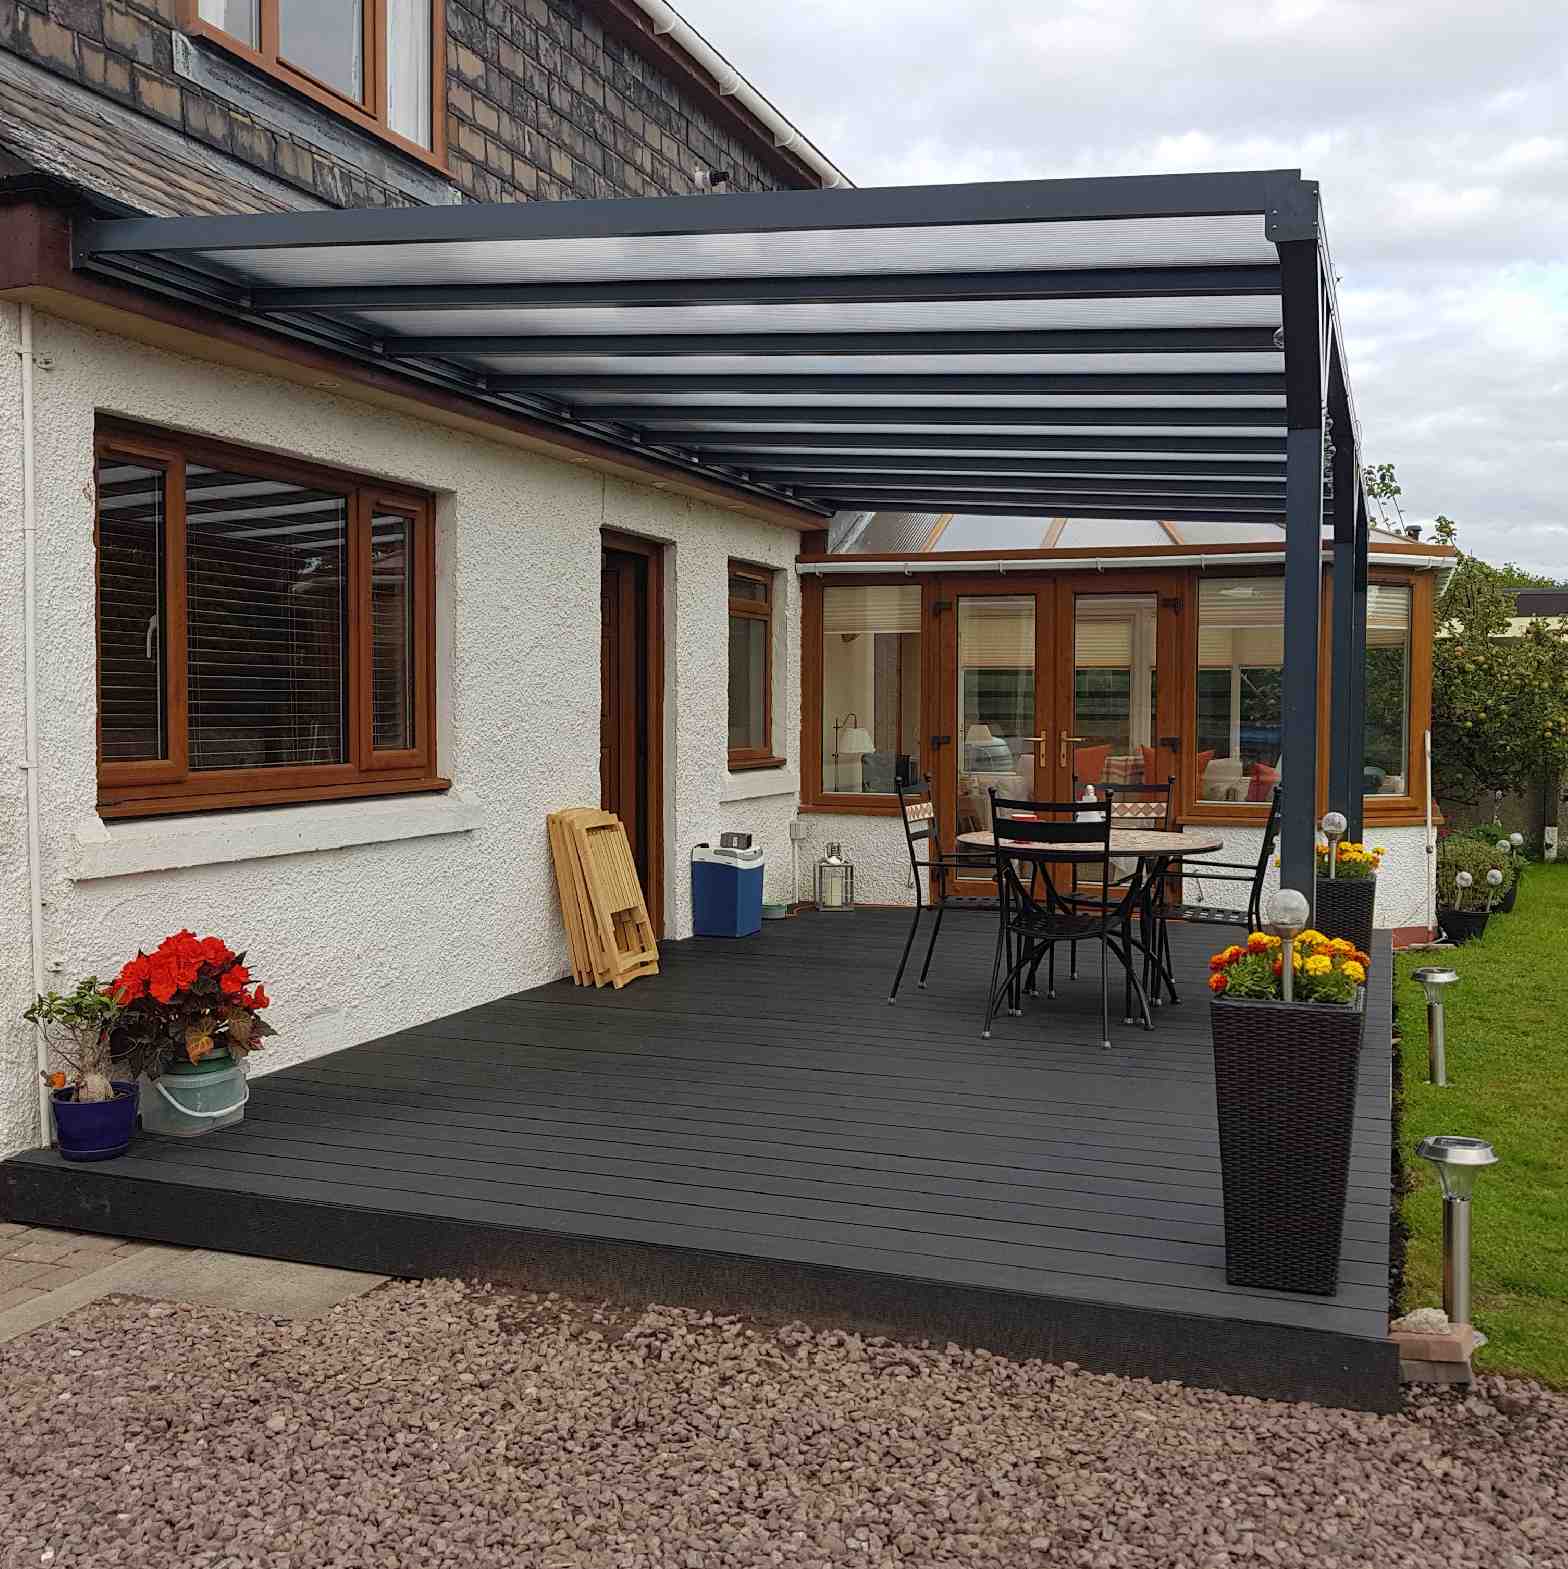 Buy Omega Verandah, Anthracite Grey, 16mm Polycarbonate Glazing - 9.1m (W) x 4.5m (P), (5) Supporting Posts online today